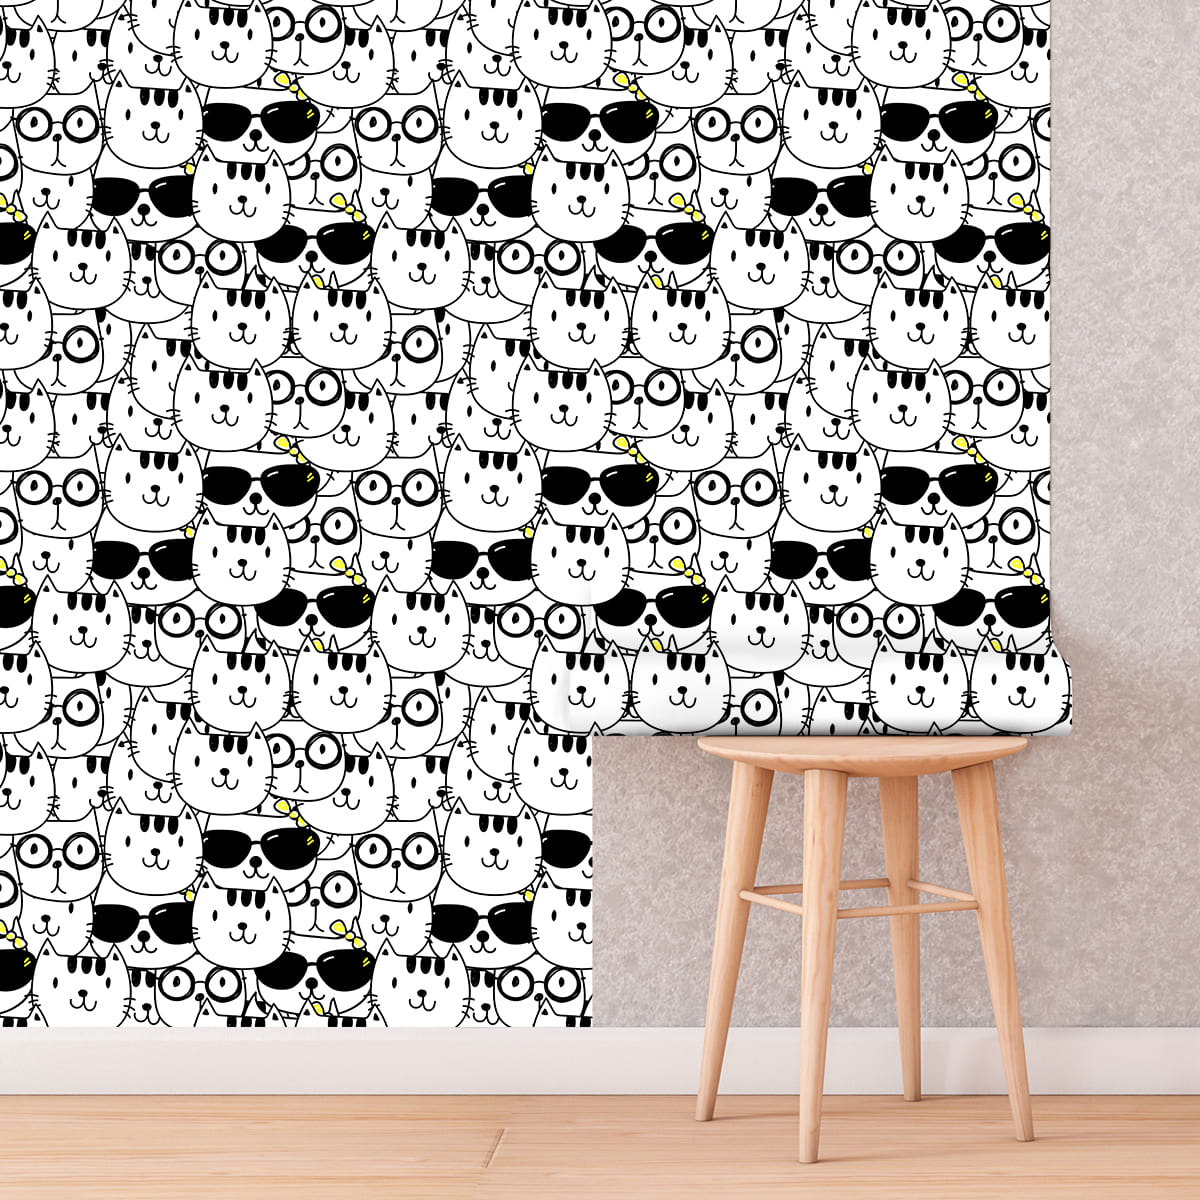 Cool Cats Motifs For Kids Room